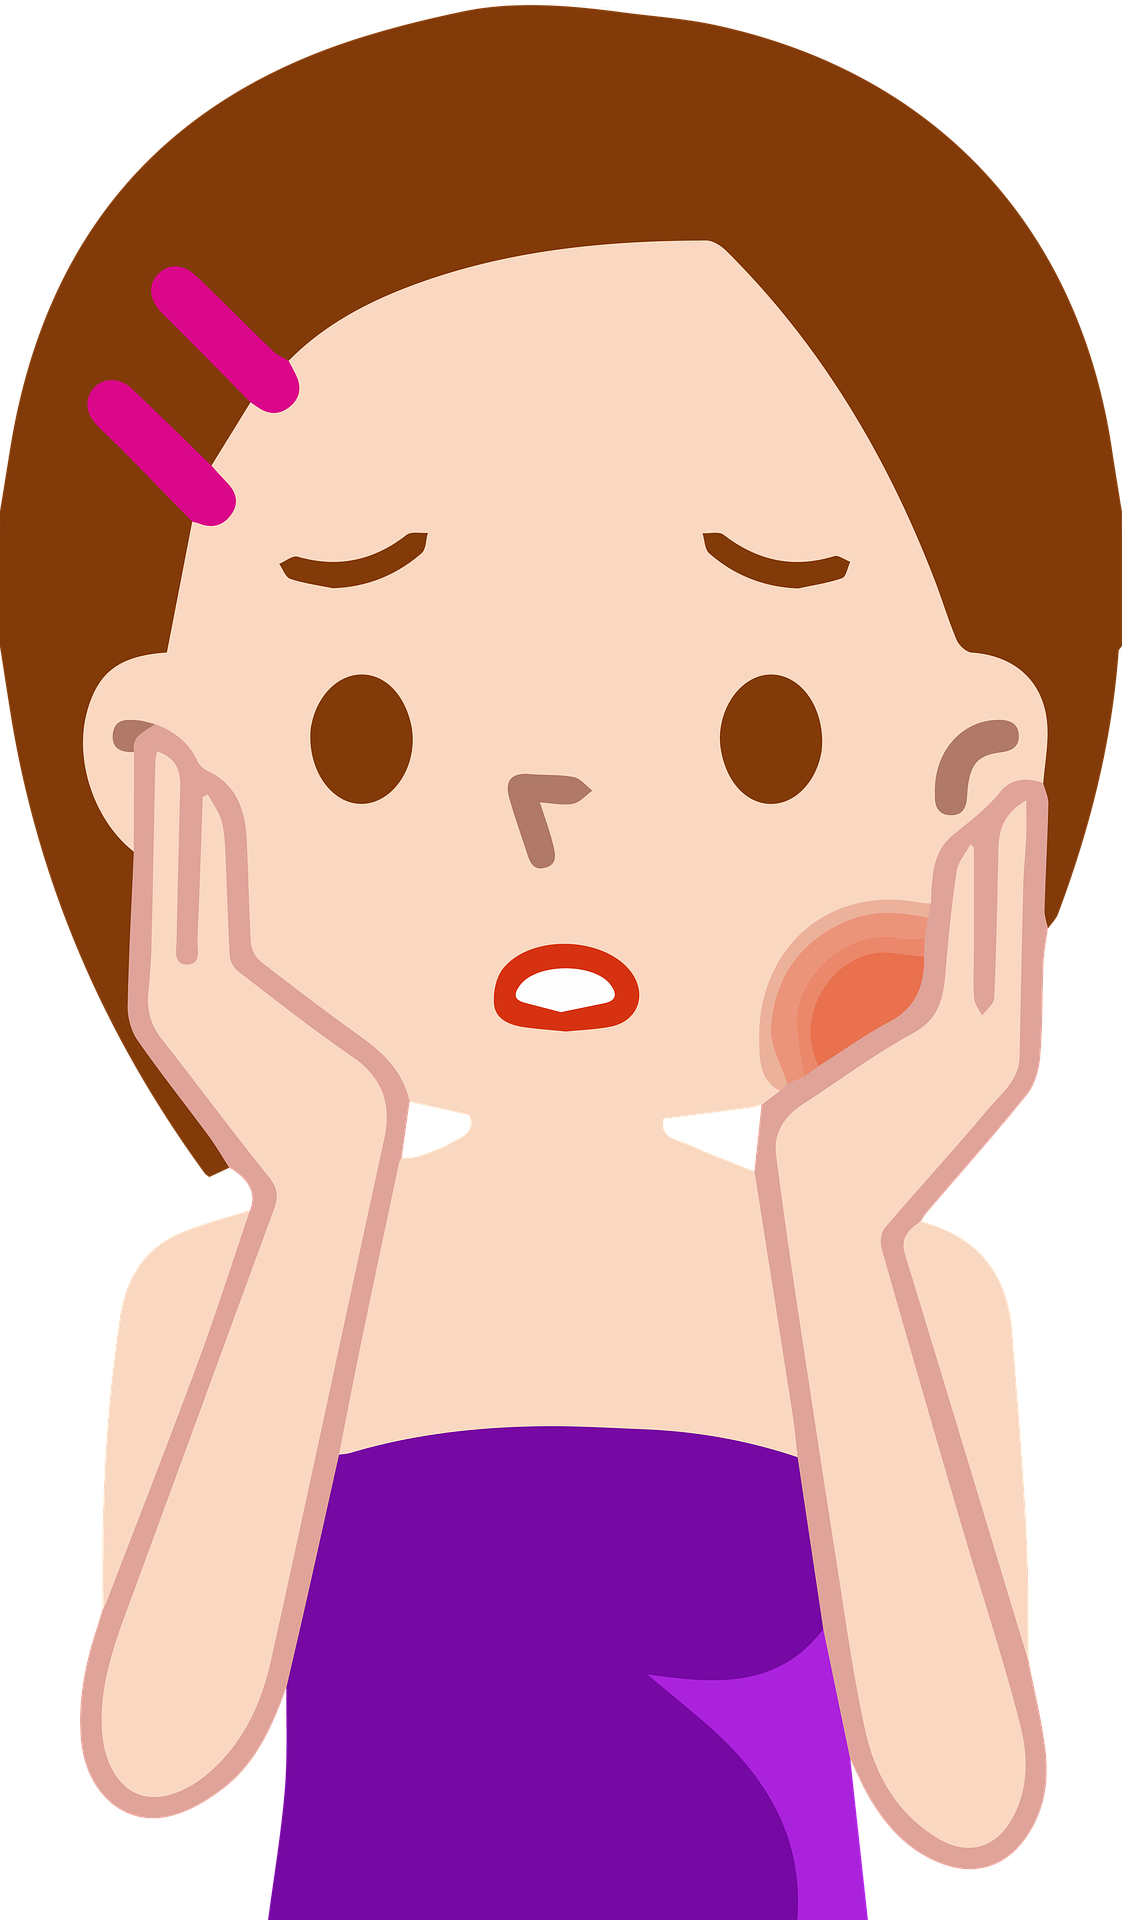 Hurt clipart epigastric pain. Coping with oral and